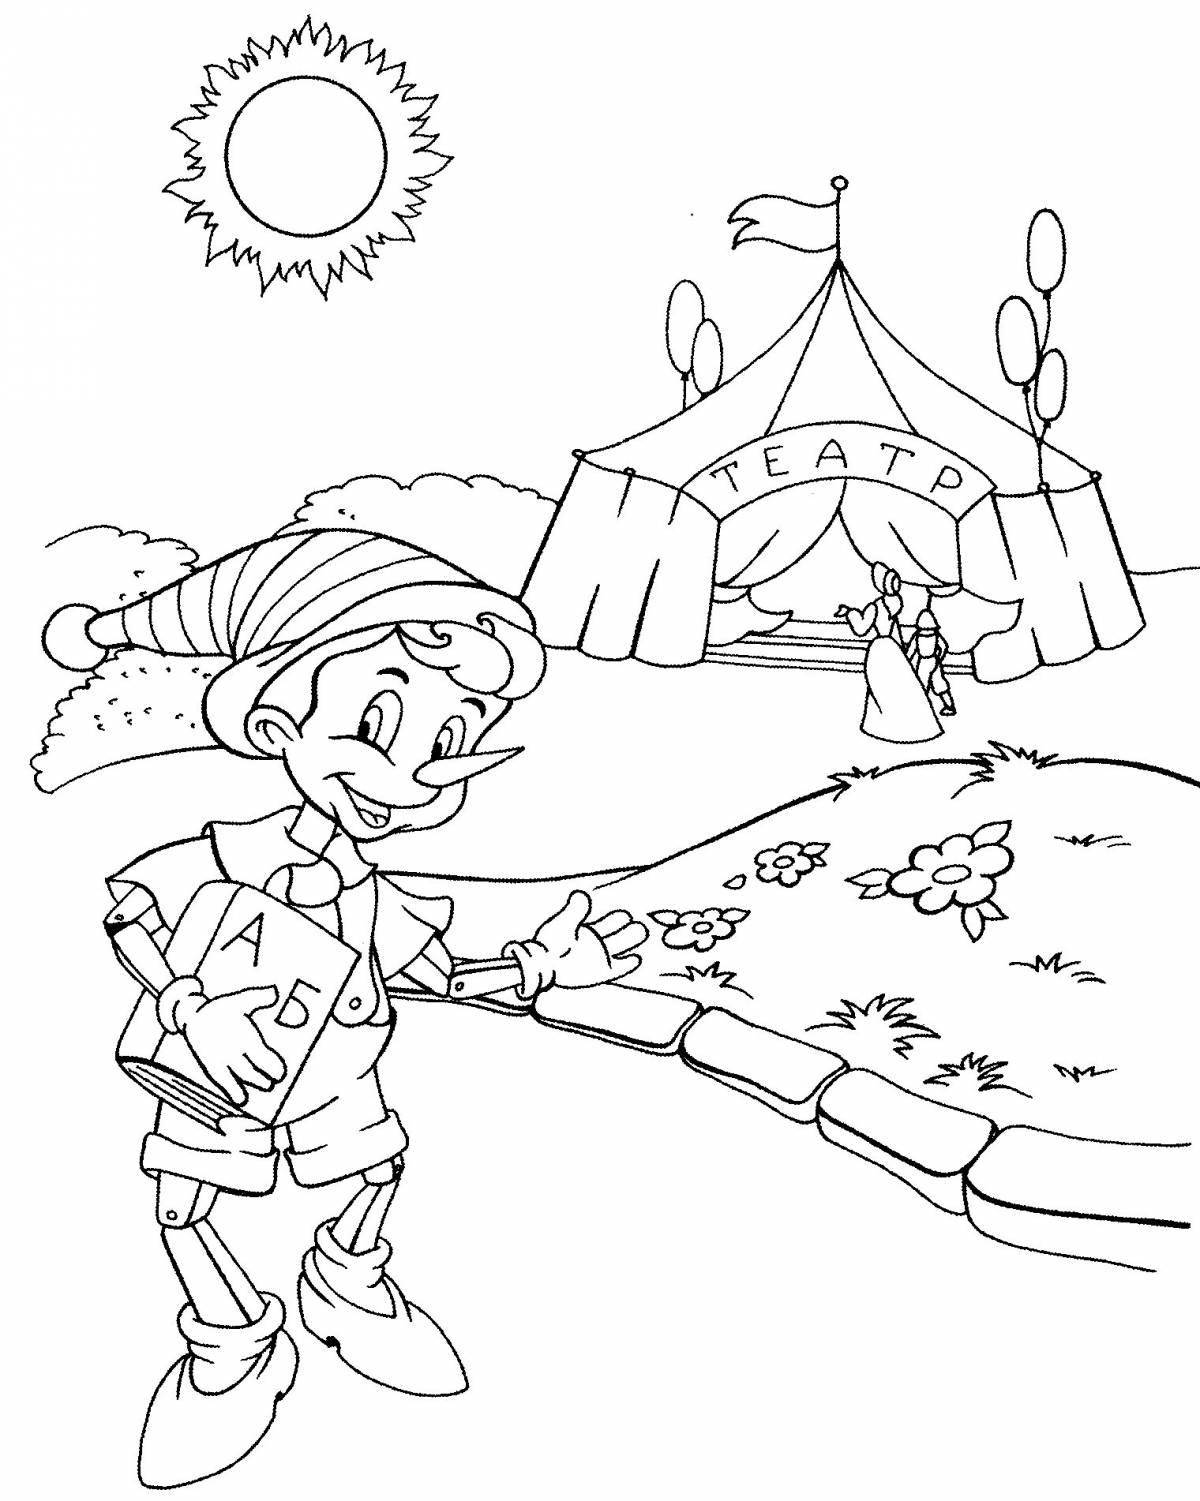 Clear pinocchio coloring page